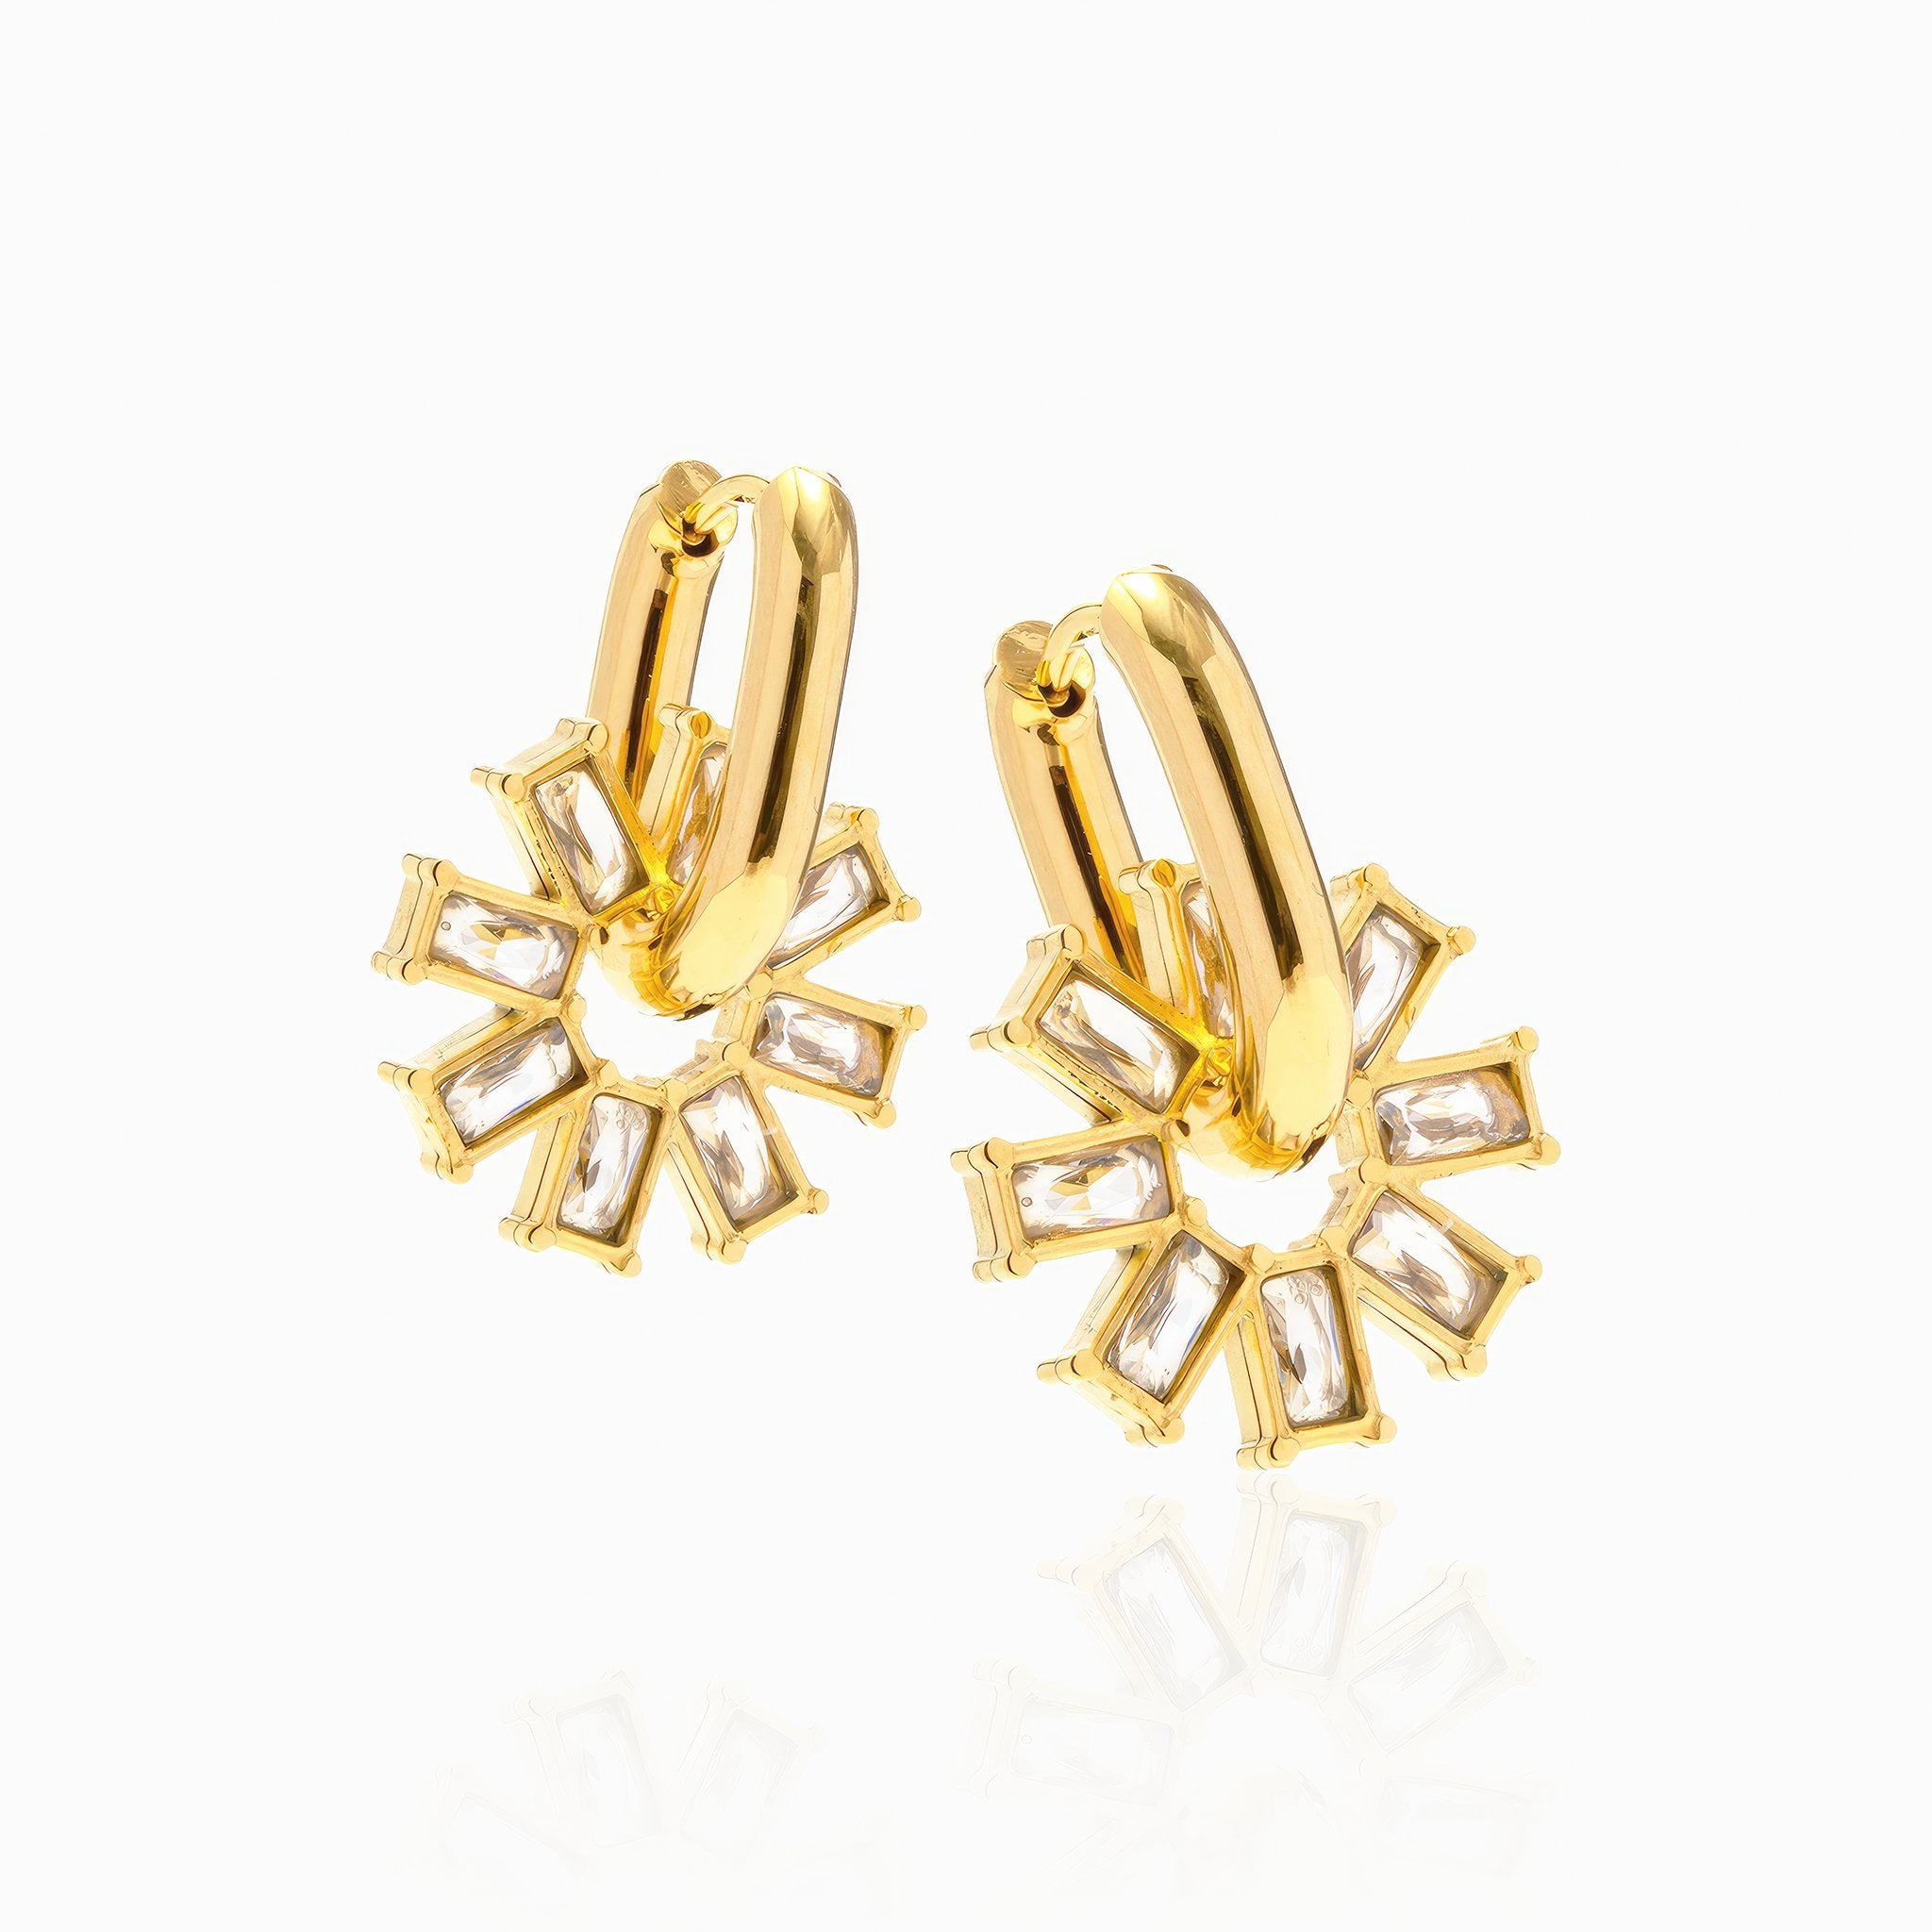 Snowflake Earrings with White Gemstones - Nobbier - Earrings - 18K Gold And Titanium PVD Coated Jewelry